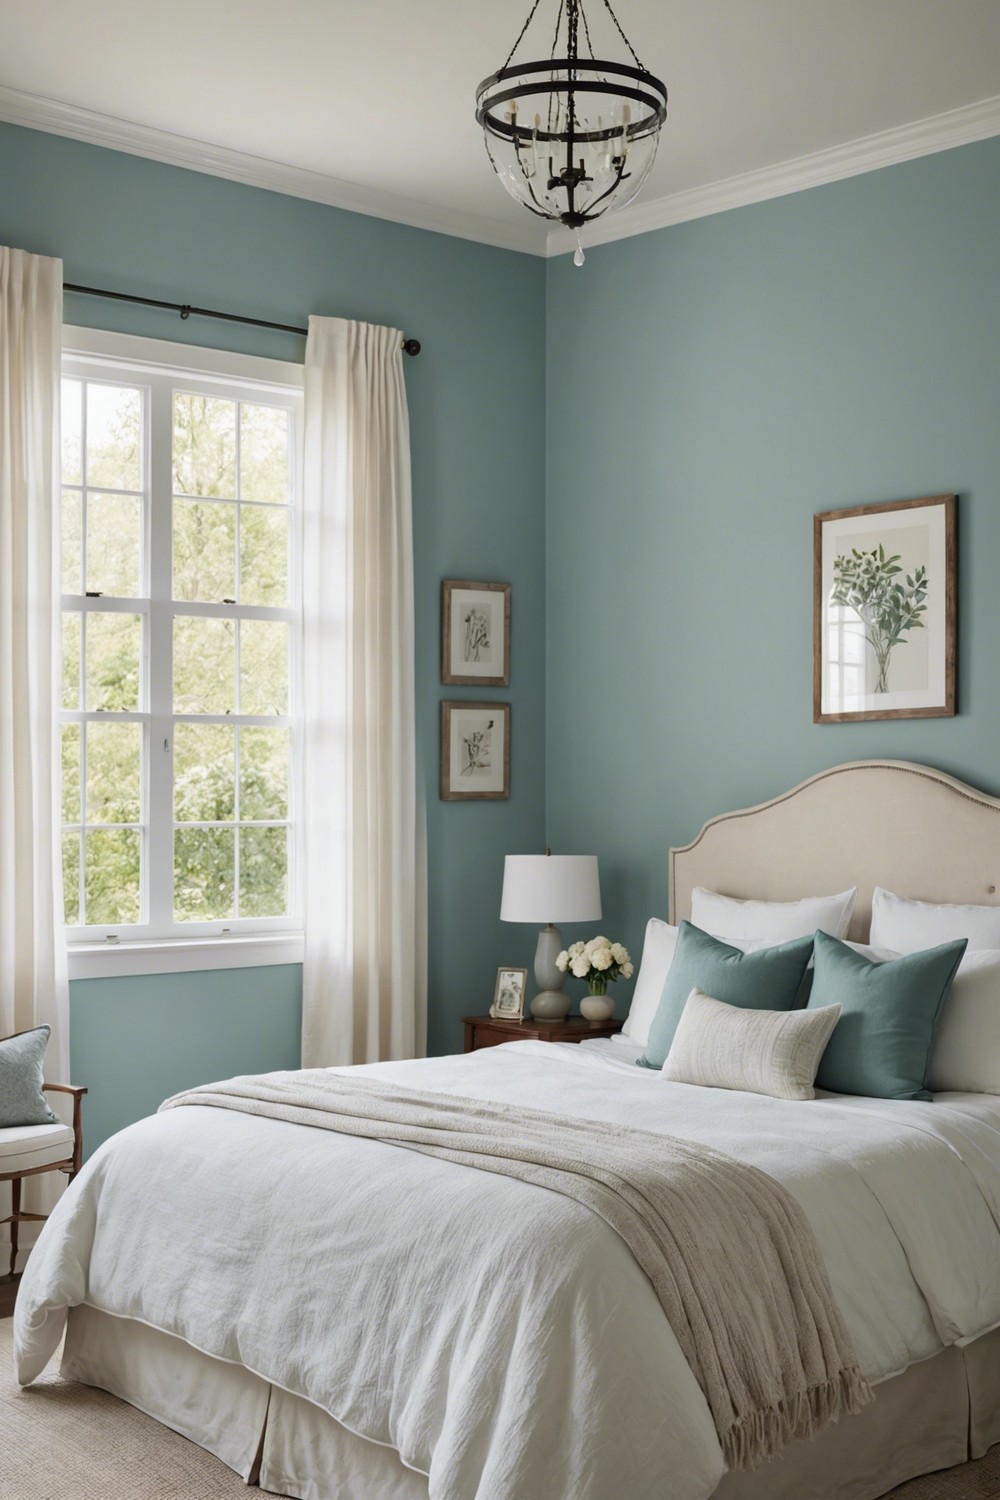 Soft and Calming: Light Teal with Creamy White